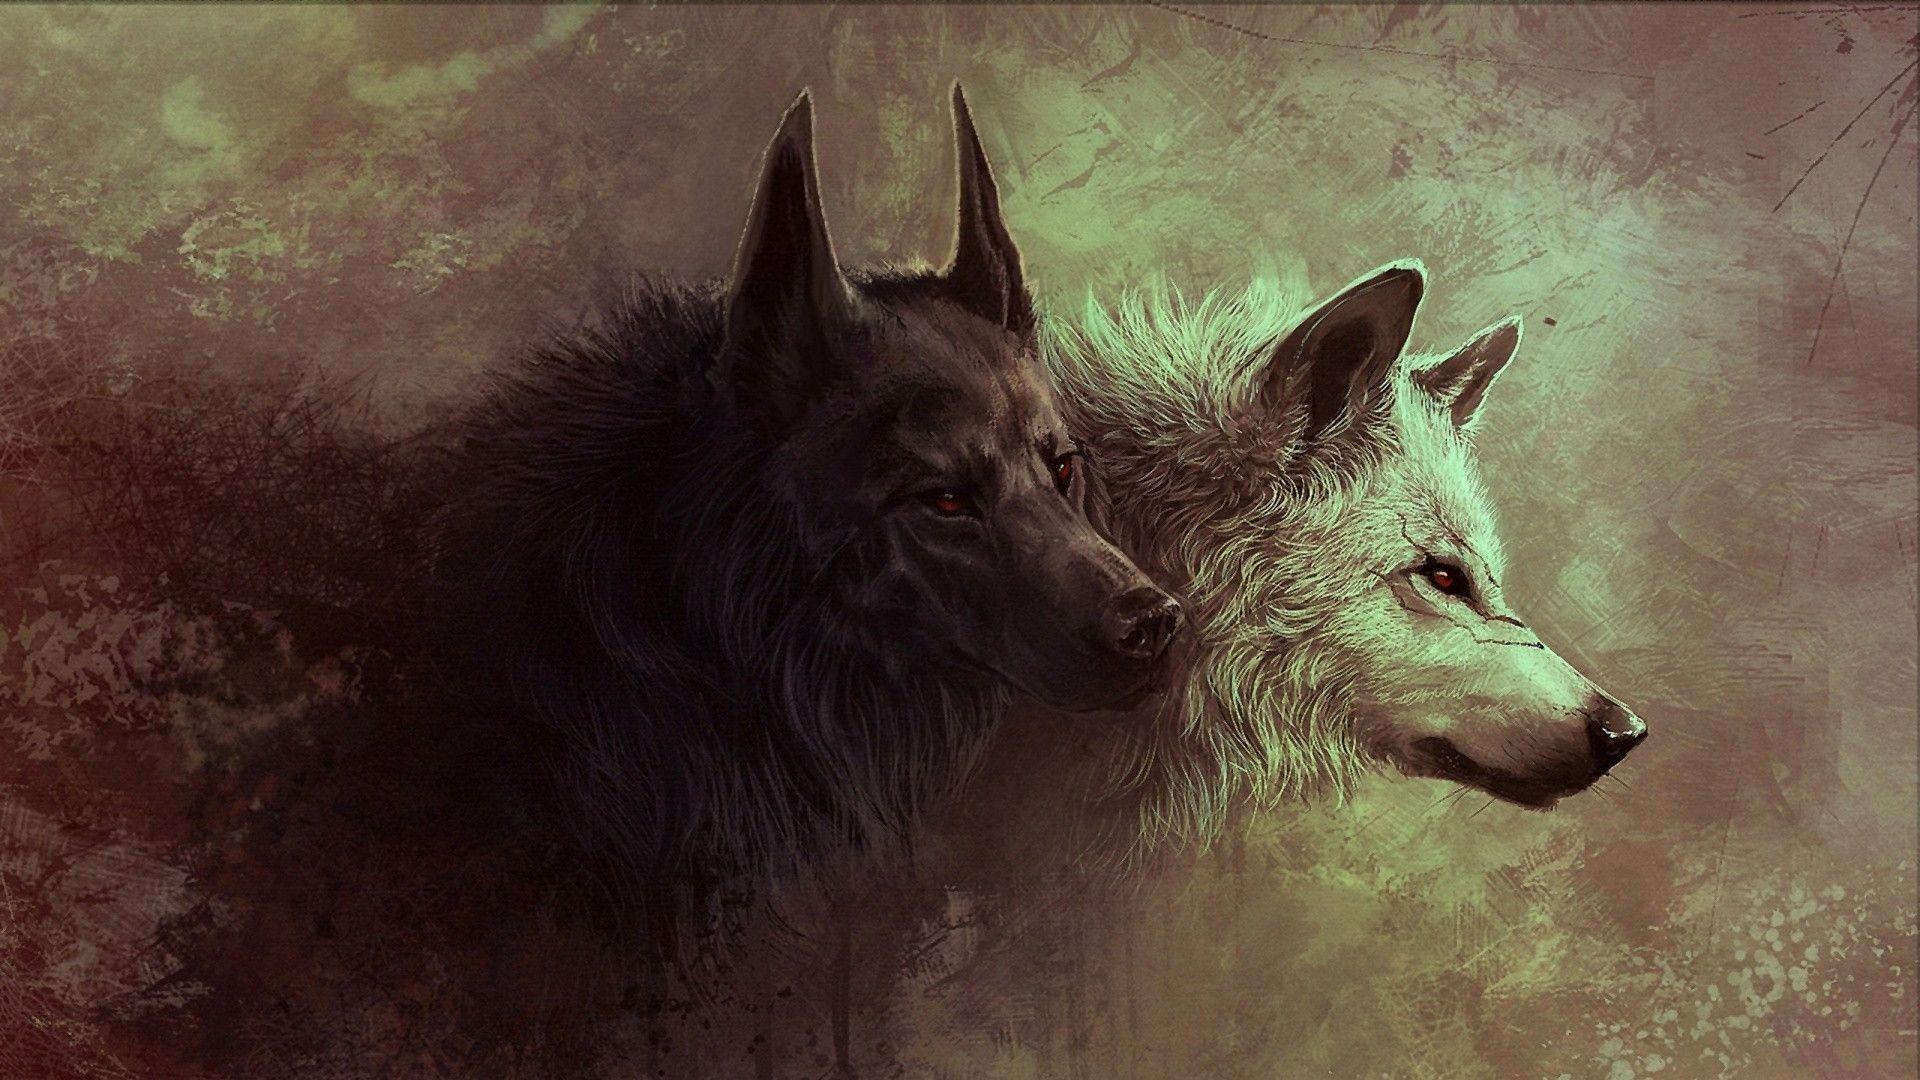 Wallpapers For > Wolf Wallpaper 1920x1080